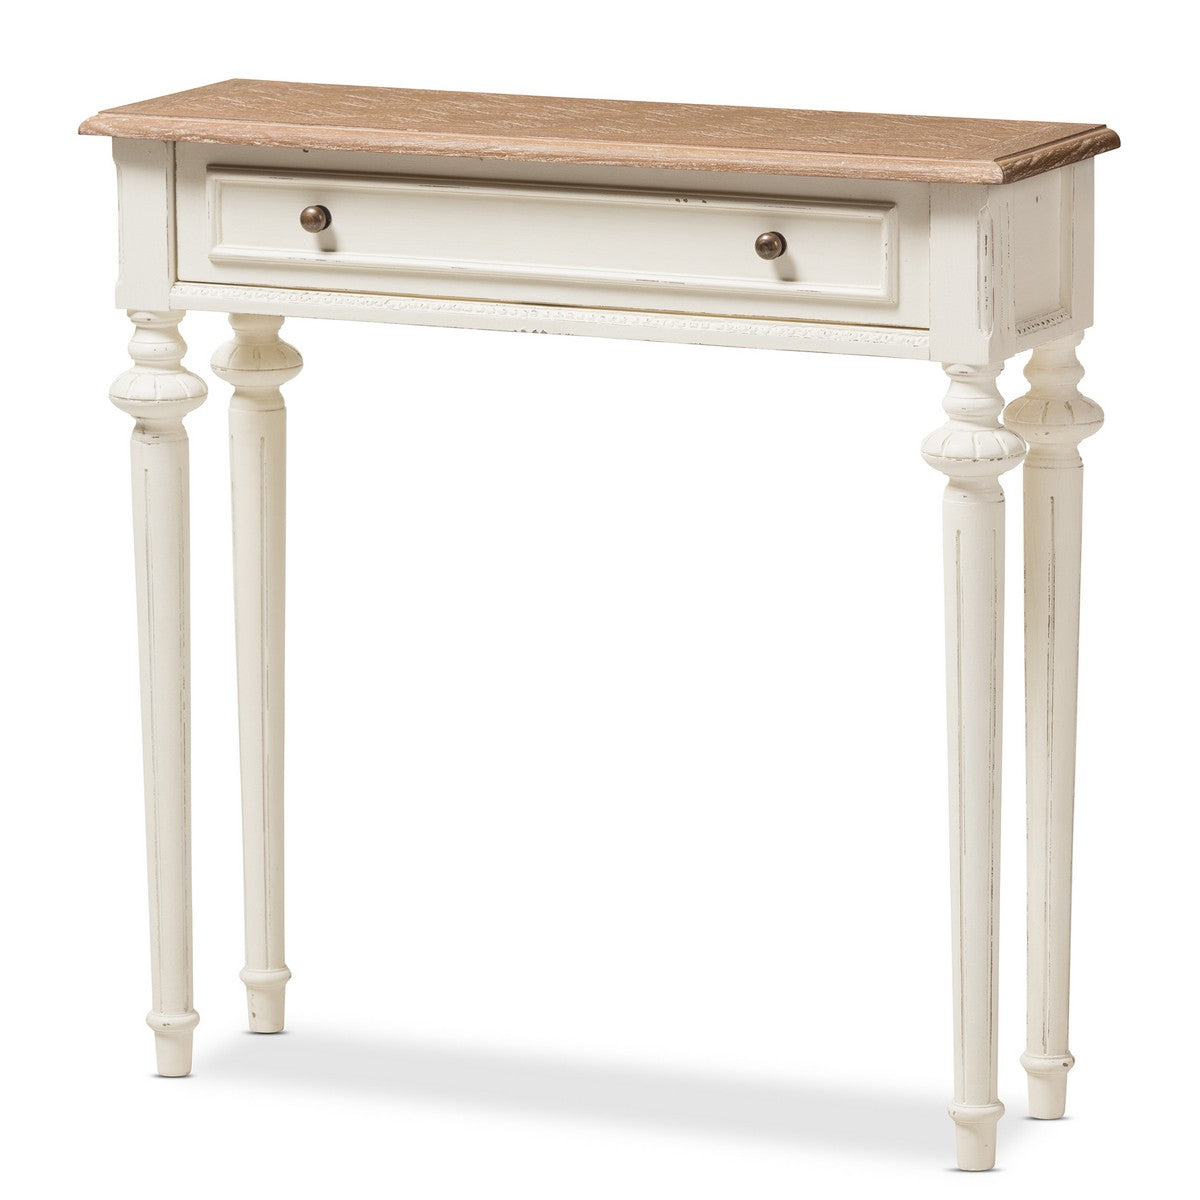 Baxton Studio Marquetterie French Provincial Style Weathered Oak and White Wash Distressed Finish Wood Two-Tone Console Table Baxton Studio-side tables-Minimal And Modern - 1